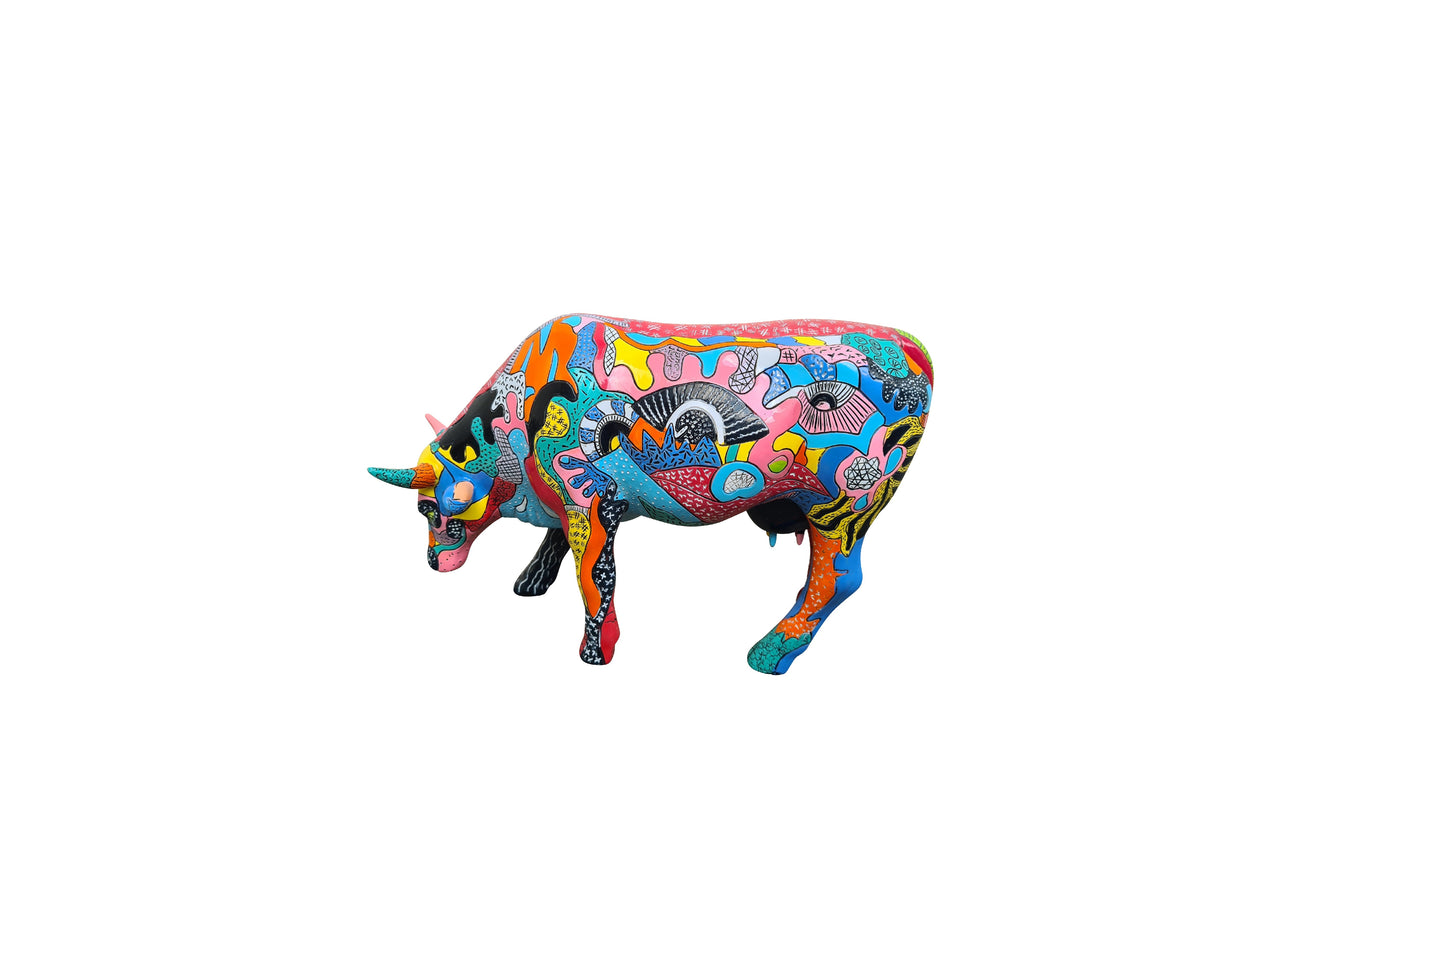 Cow Parade "Partying" cow statue, length 12 inches (30.5 centimeters)